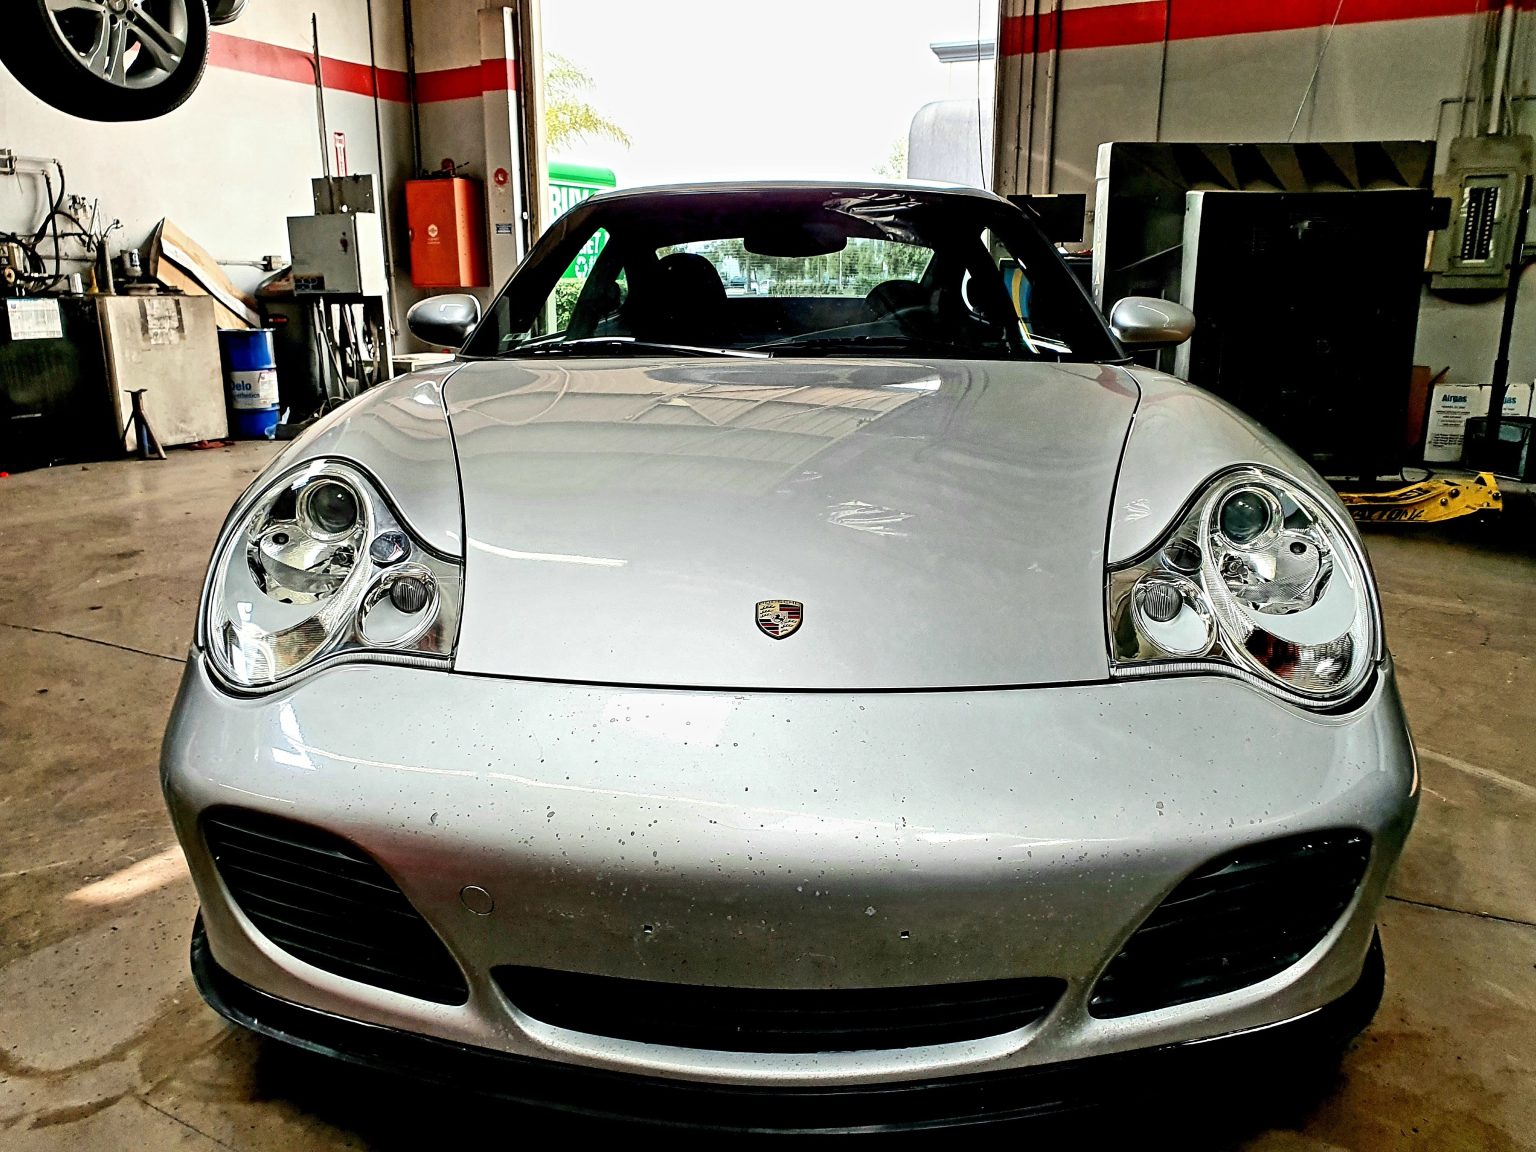 A Silver Color Car With Brand New Headlights